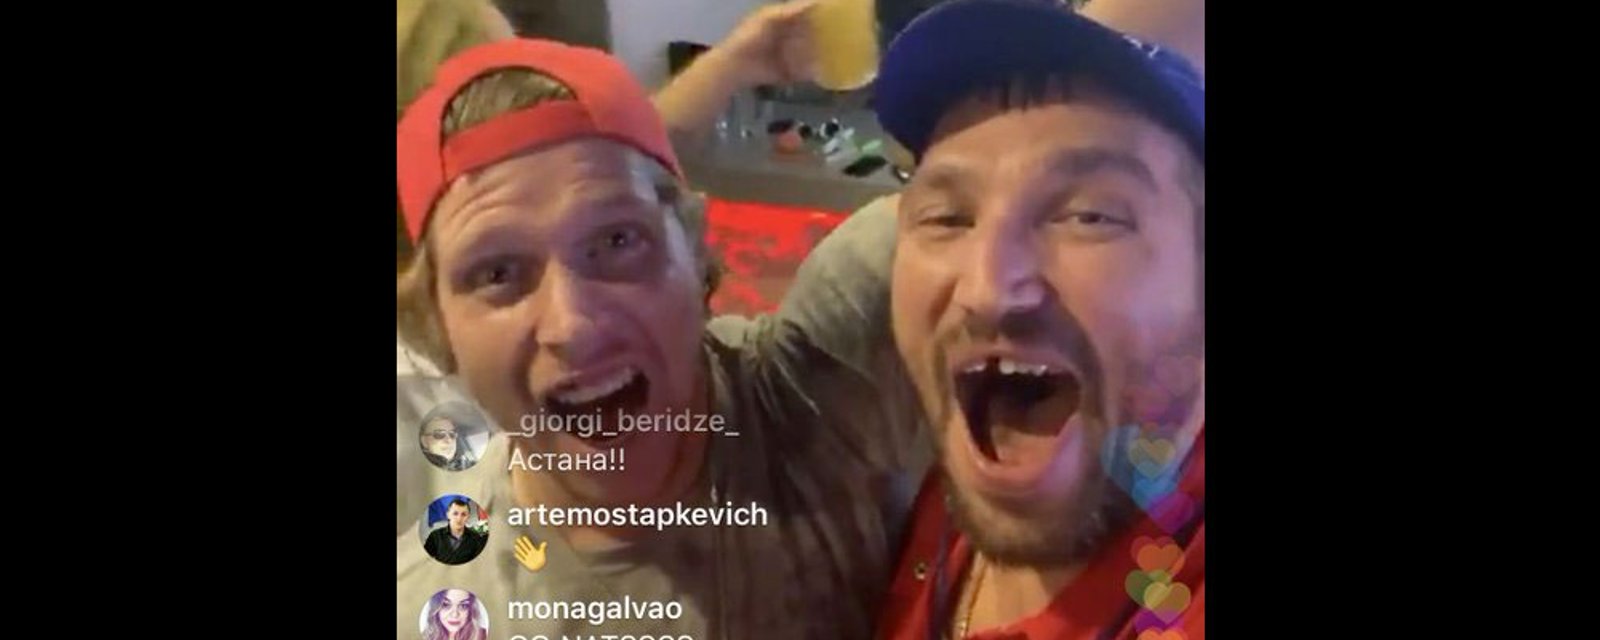 Ovechkin and the Caps go absolutely bananas after Nationals win Game 7 of the World Series